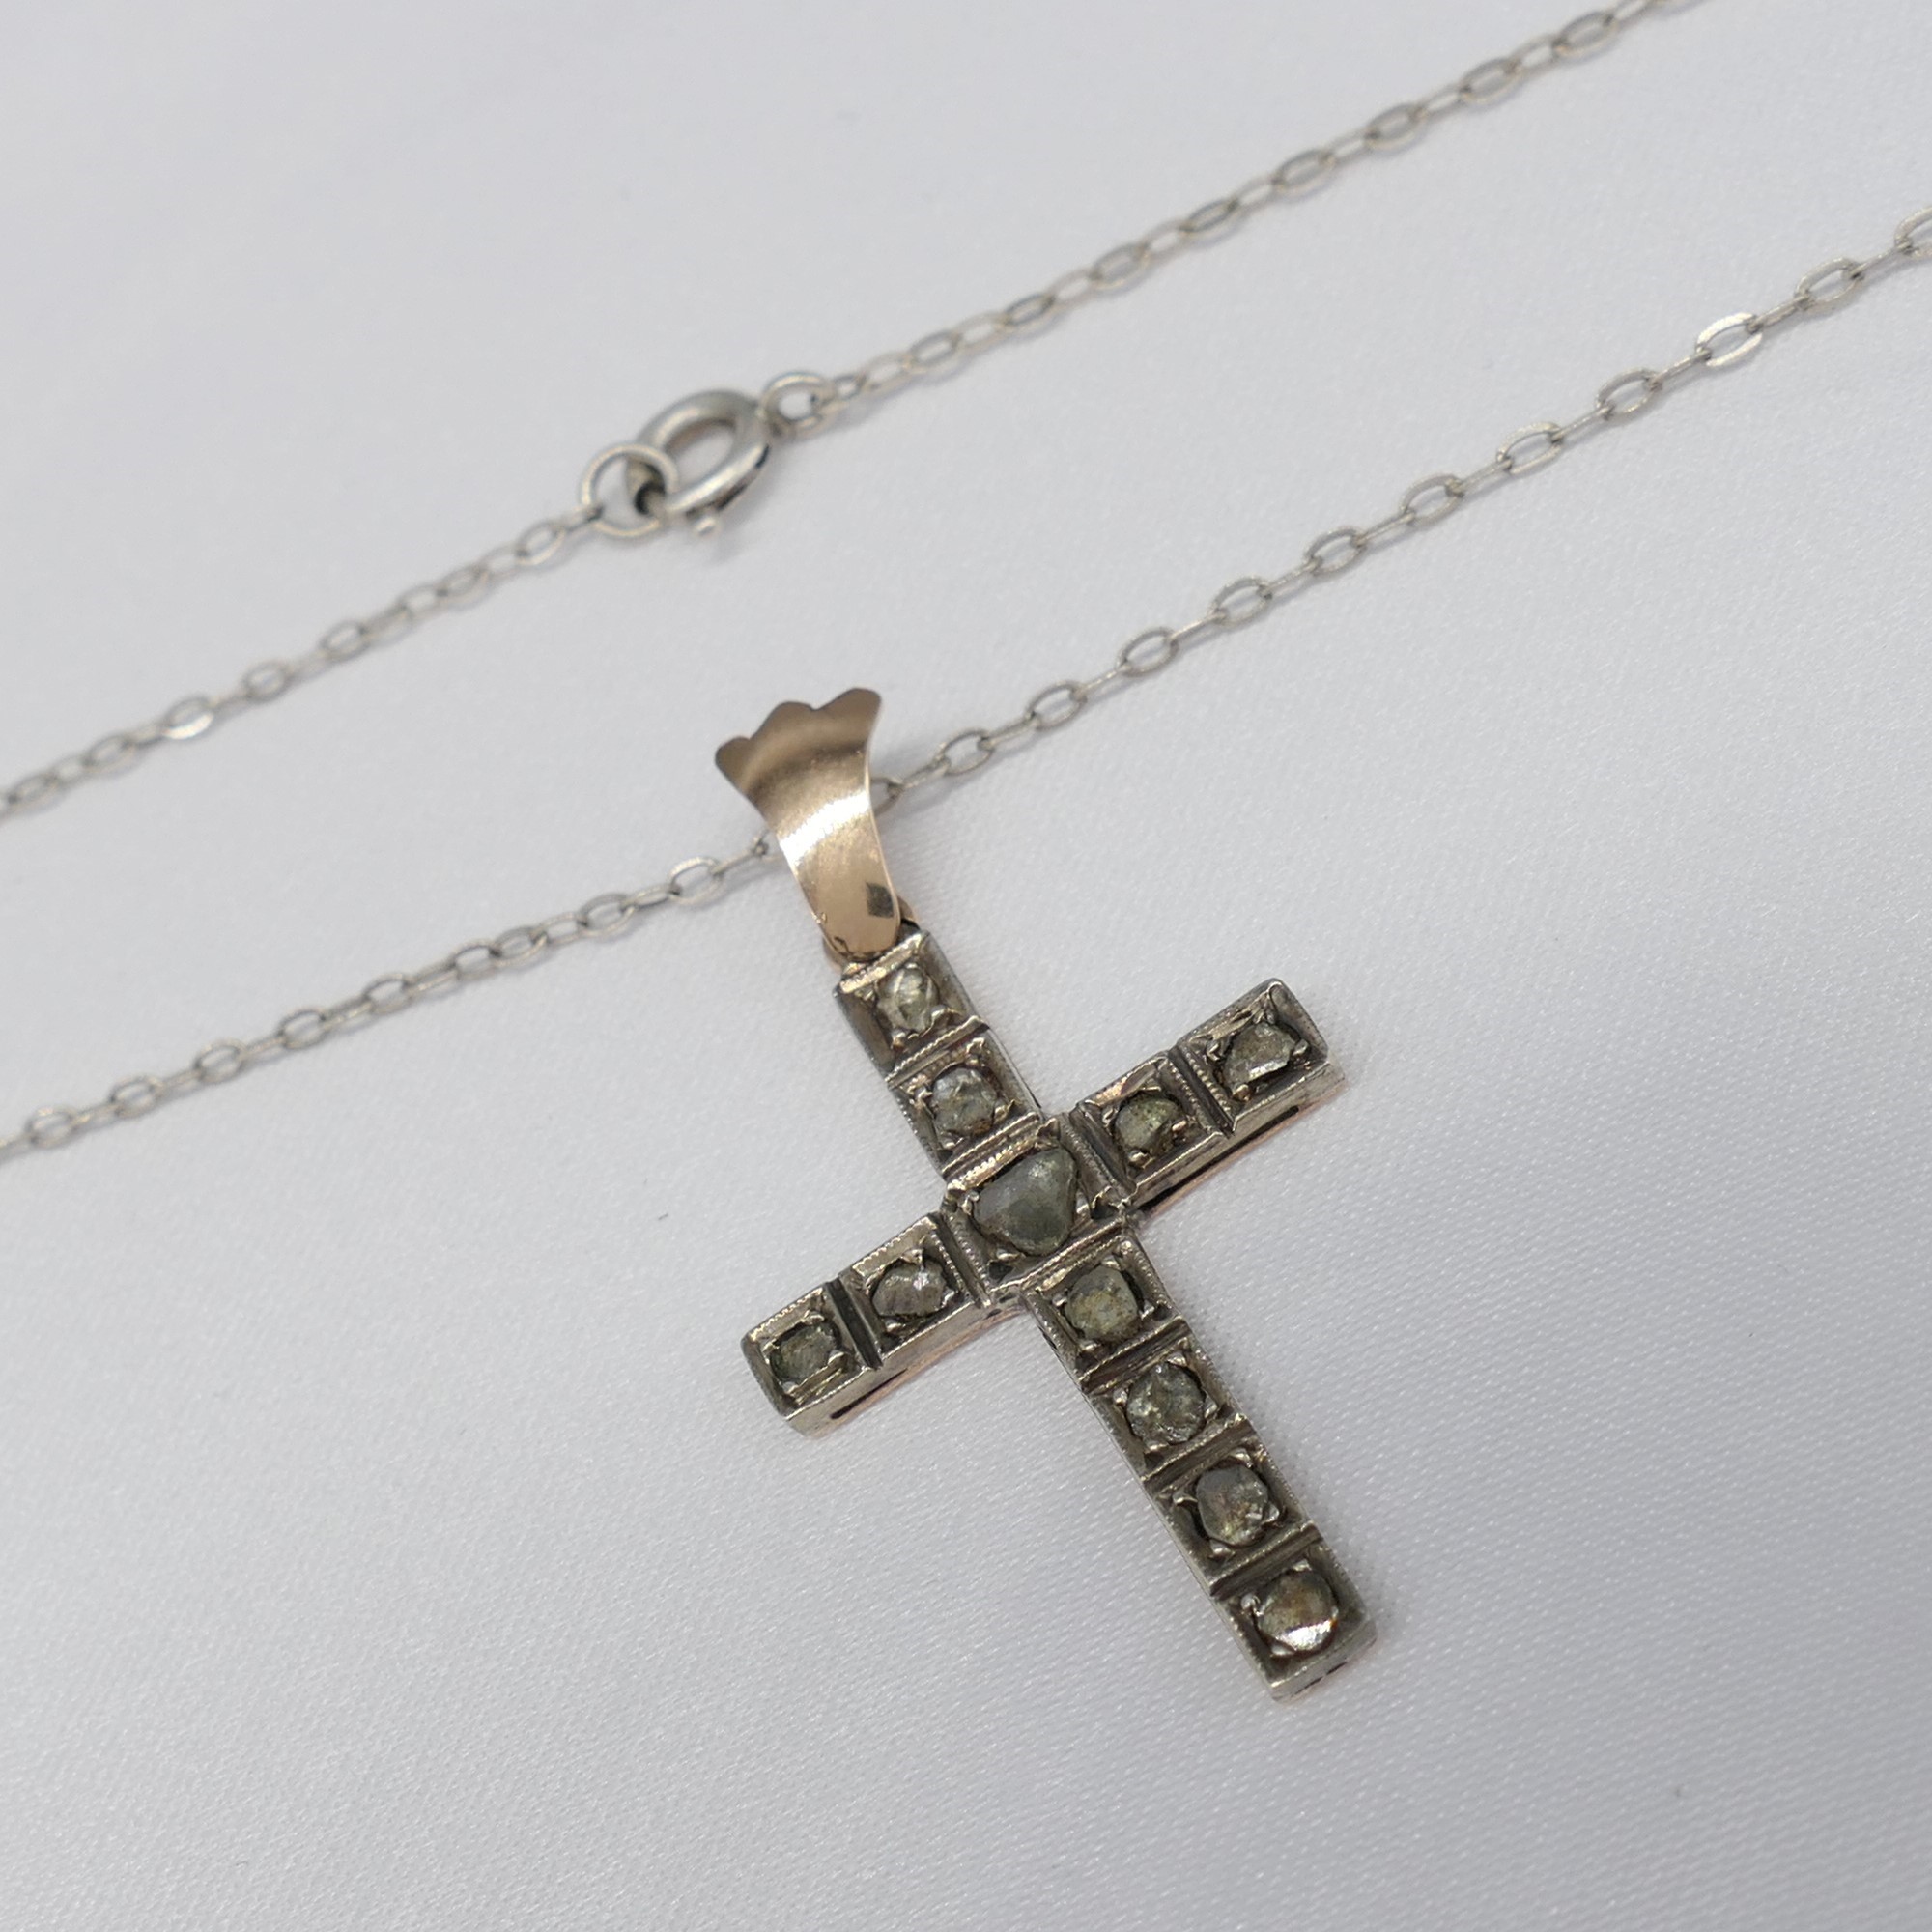 Antique, Hand Fashioned Rose-Cut Diamond Cross Pendant In Yellow Gold and Silver - Image 4 of 6